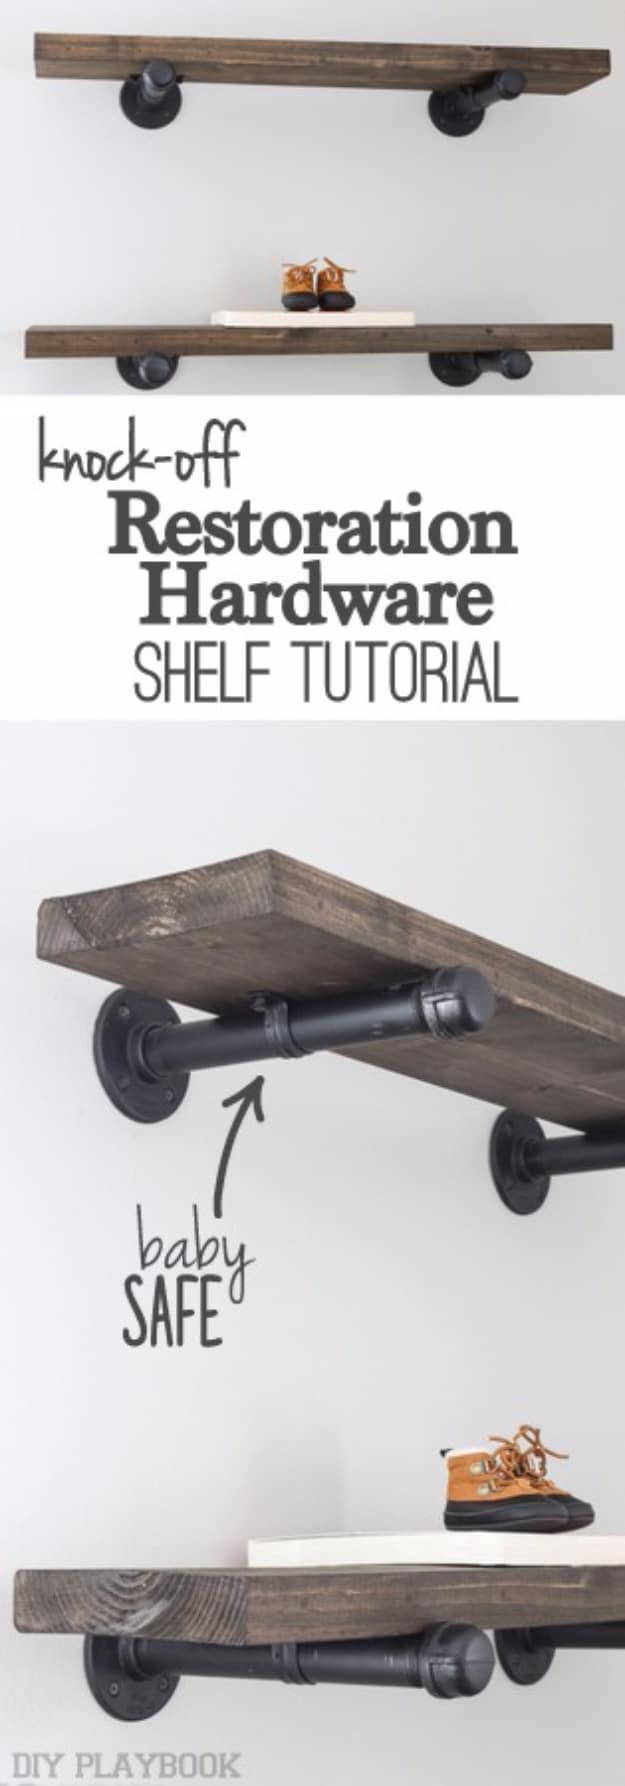 DIY Shelves and Do It Yourself Shelving Ideas - Knock Off Restoration Hardware Shelf Tutorial - Easy Step by Step Shelf Projects for Bedroom, Bathroom, Closet, Wall, Kitchen and Apartment. Floating Units, Rustic Pallet Looks and Simple Storage Plans #diy #diydecor #homeimprovement #shelves